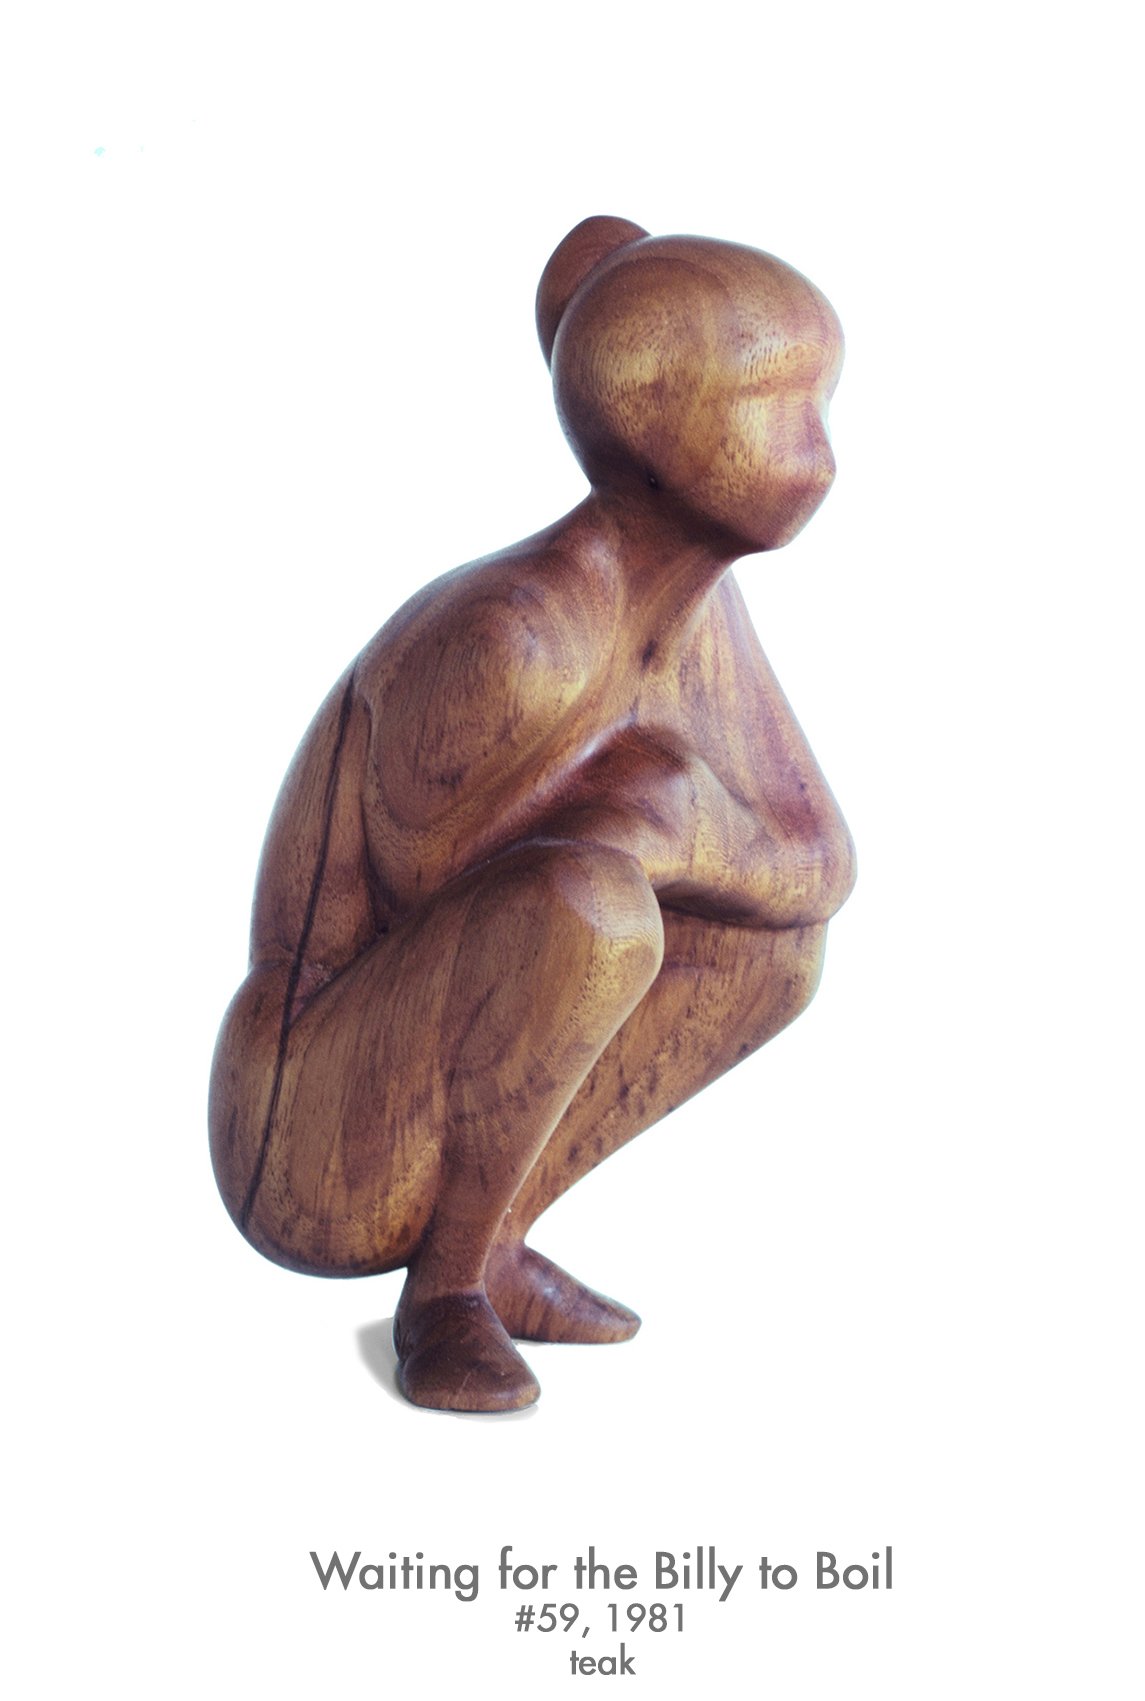 Waiting for the Billy to Boil, 1981, teak, #59